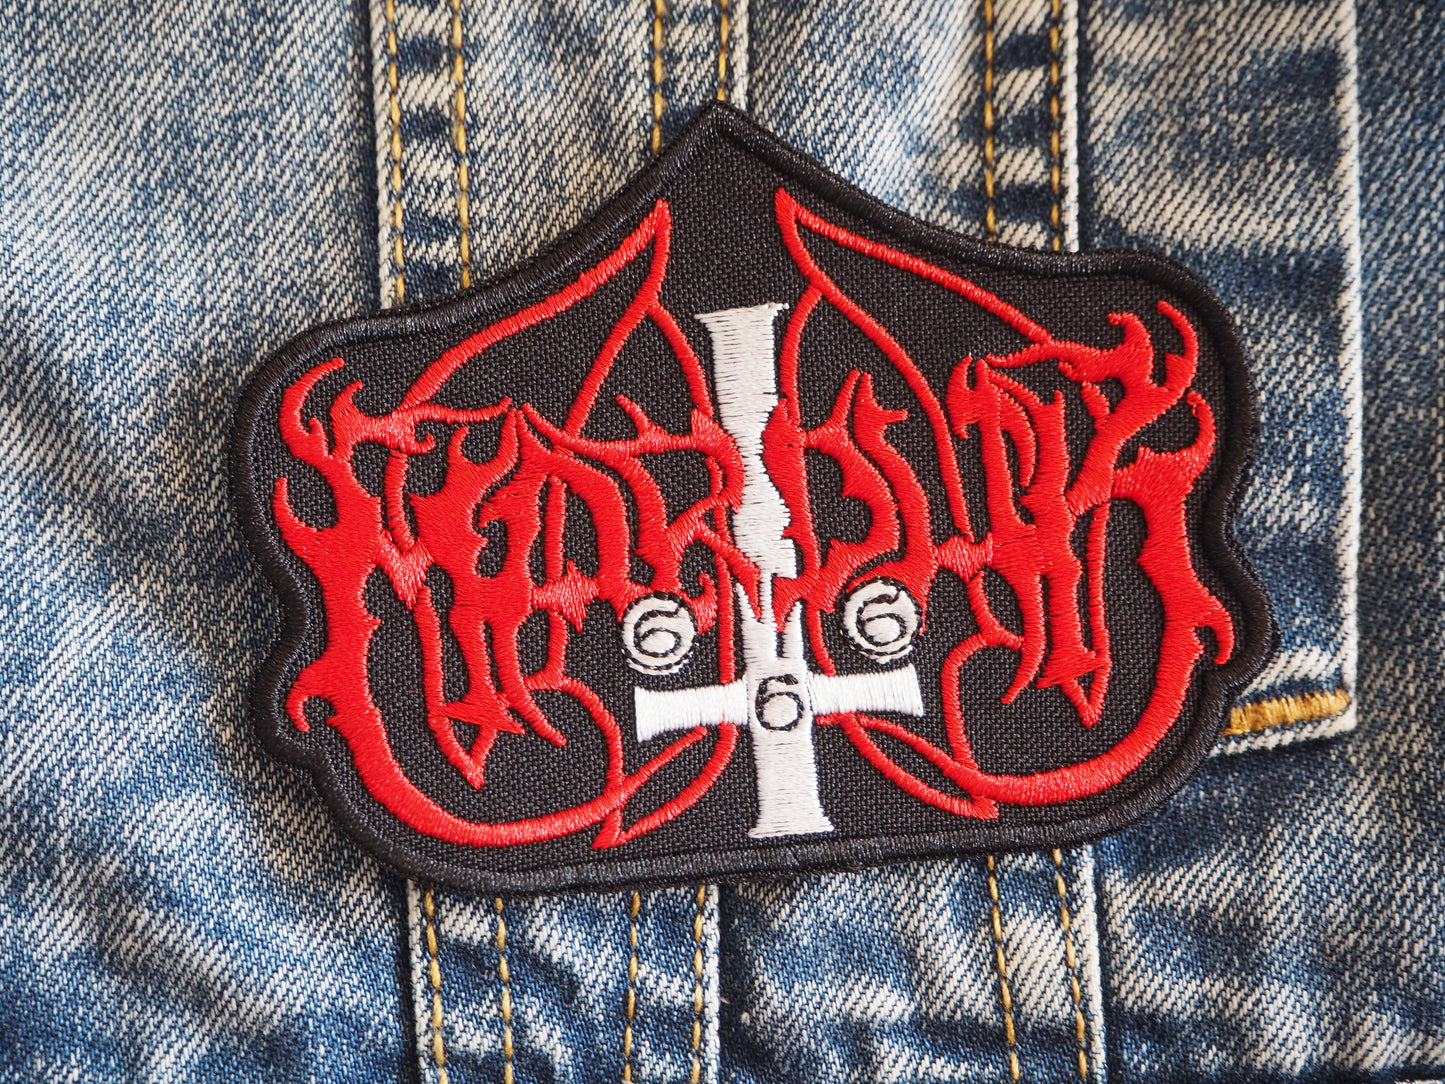 Marduk Inverted Cross Black Metal Embroidered Patch